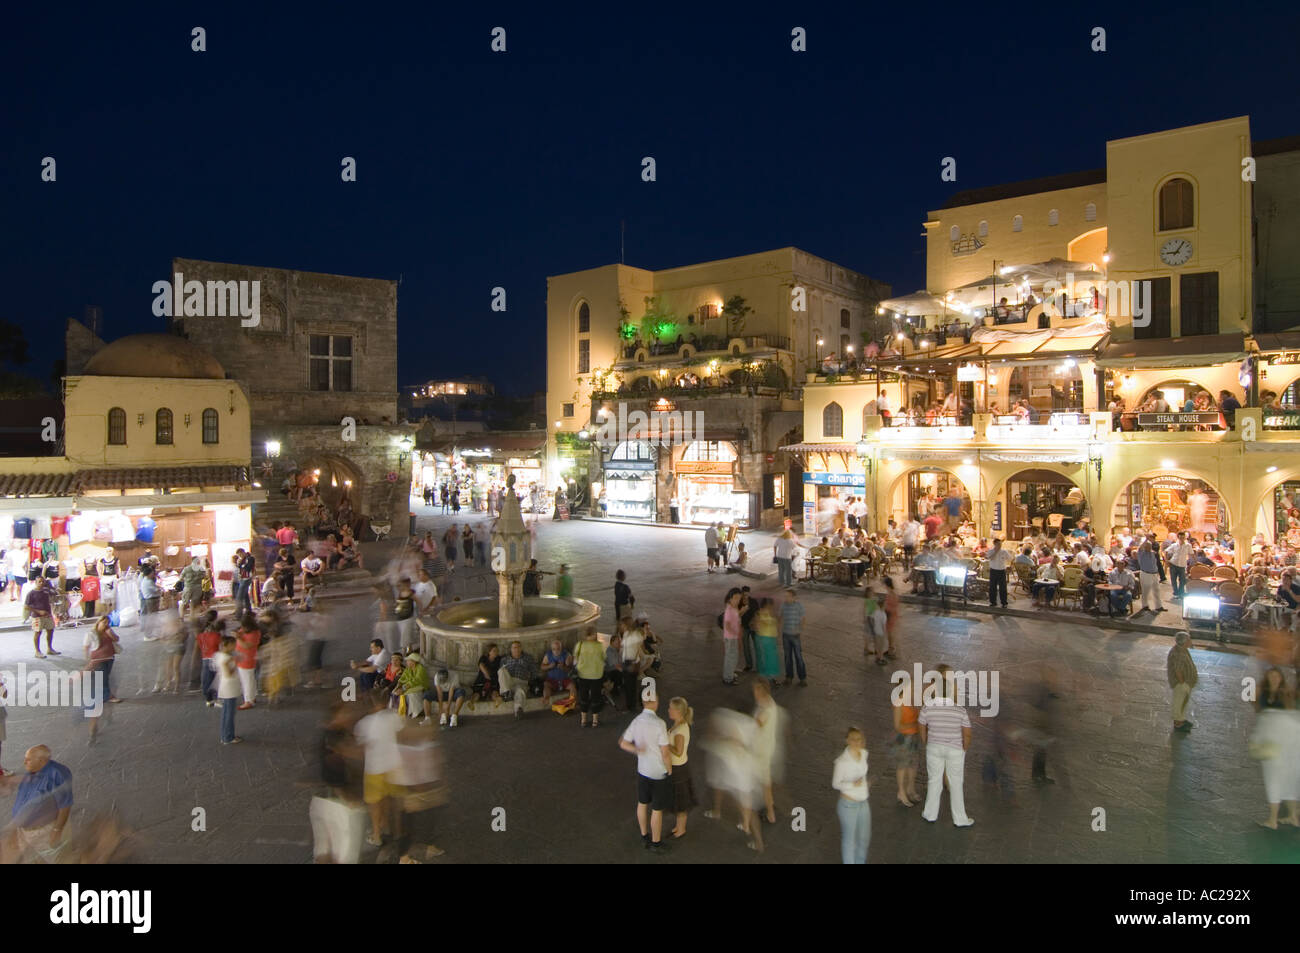 A wide angle evening night view of tourists around the fountain in Ippokratous Square in the centre of Rhodes Old Town. Stock Photo